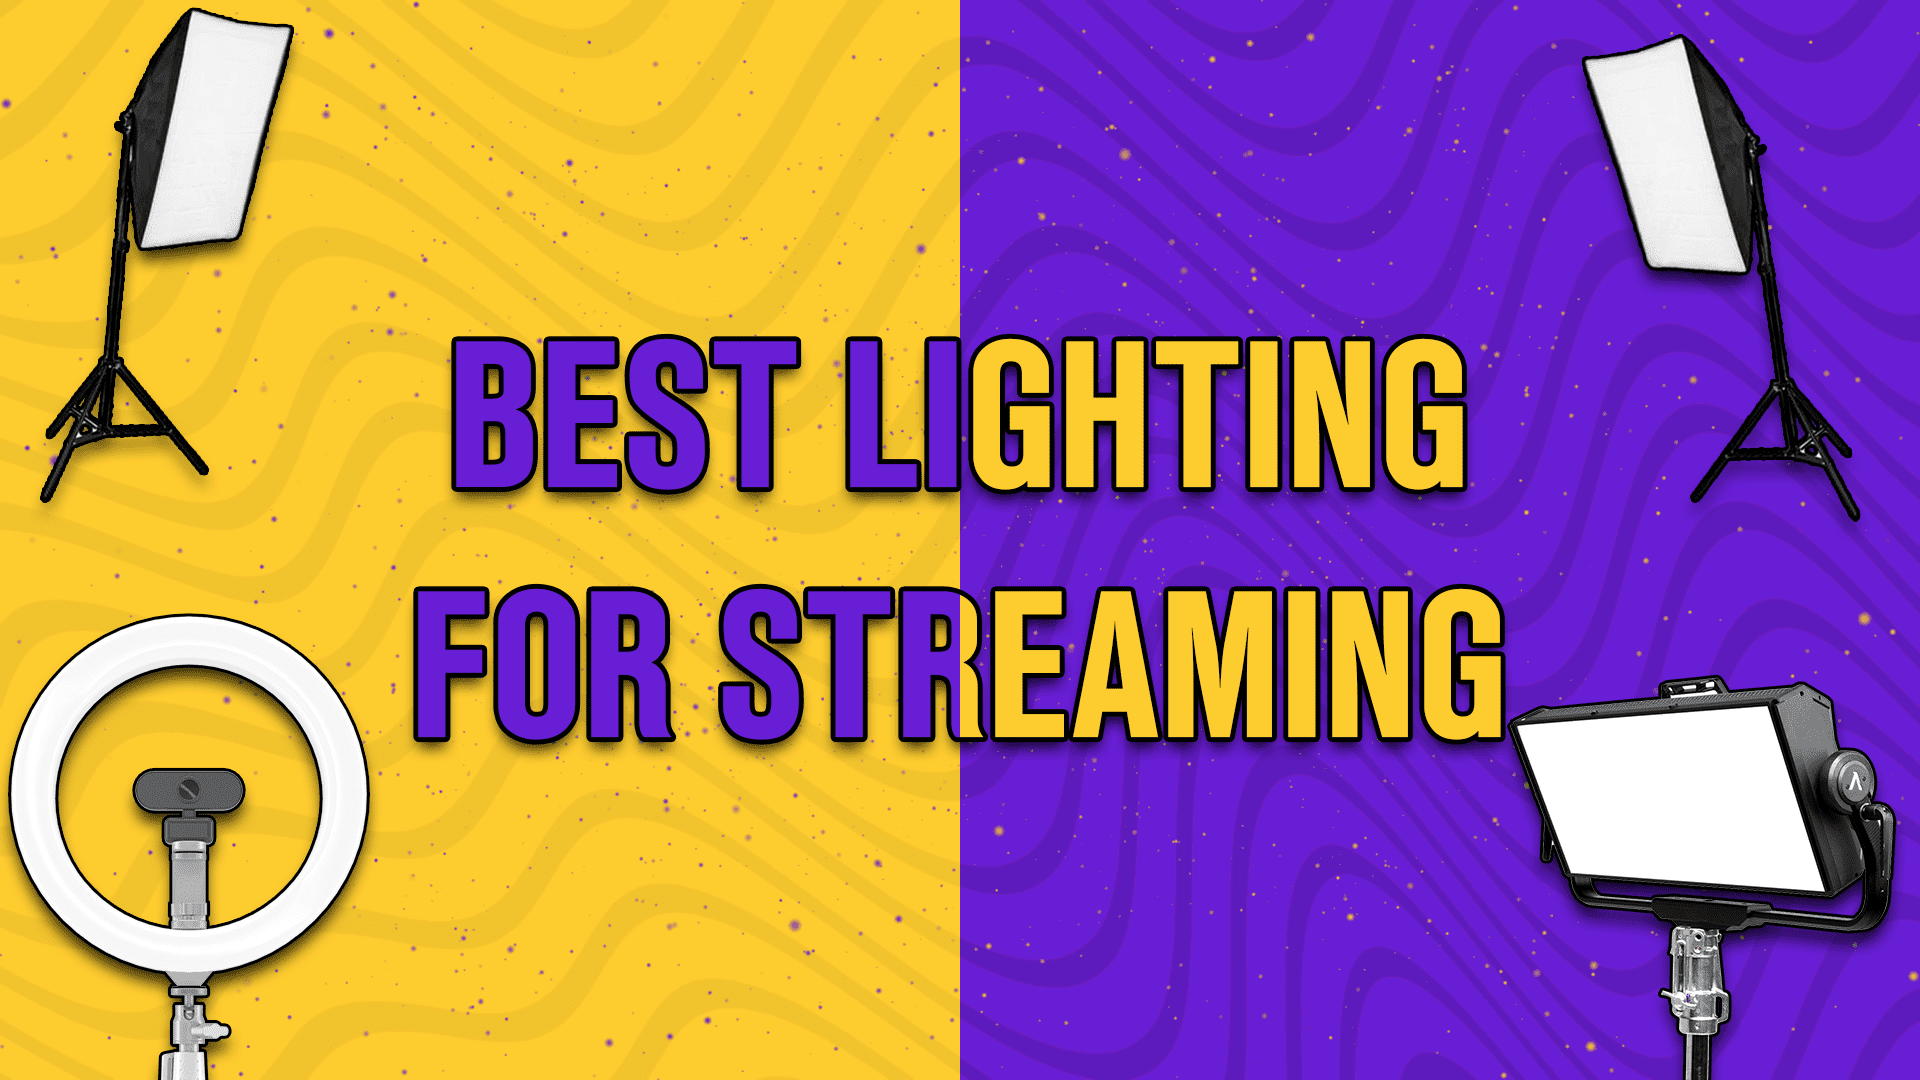 Best Lighting for Streaming/Gaming Featured Image | StreamBee